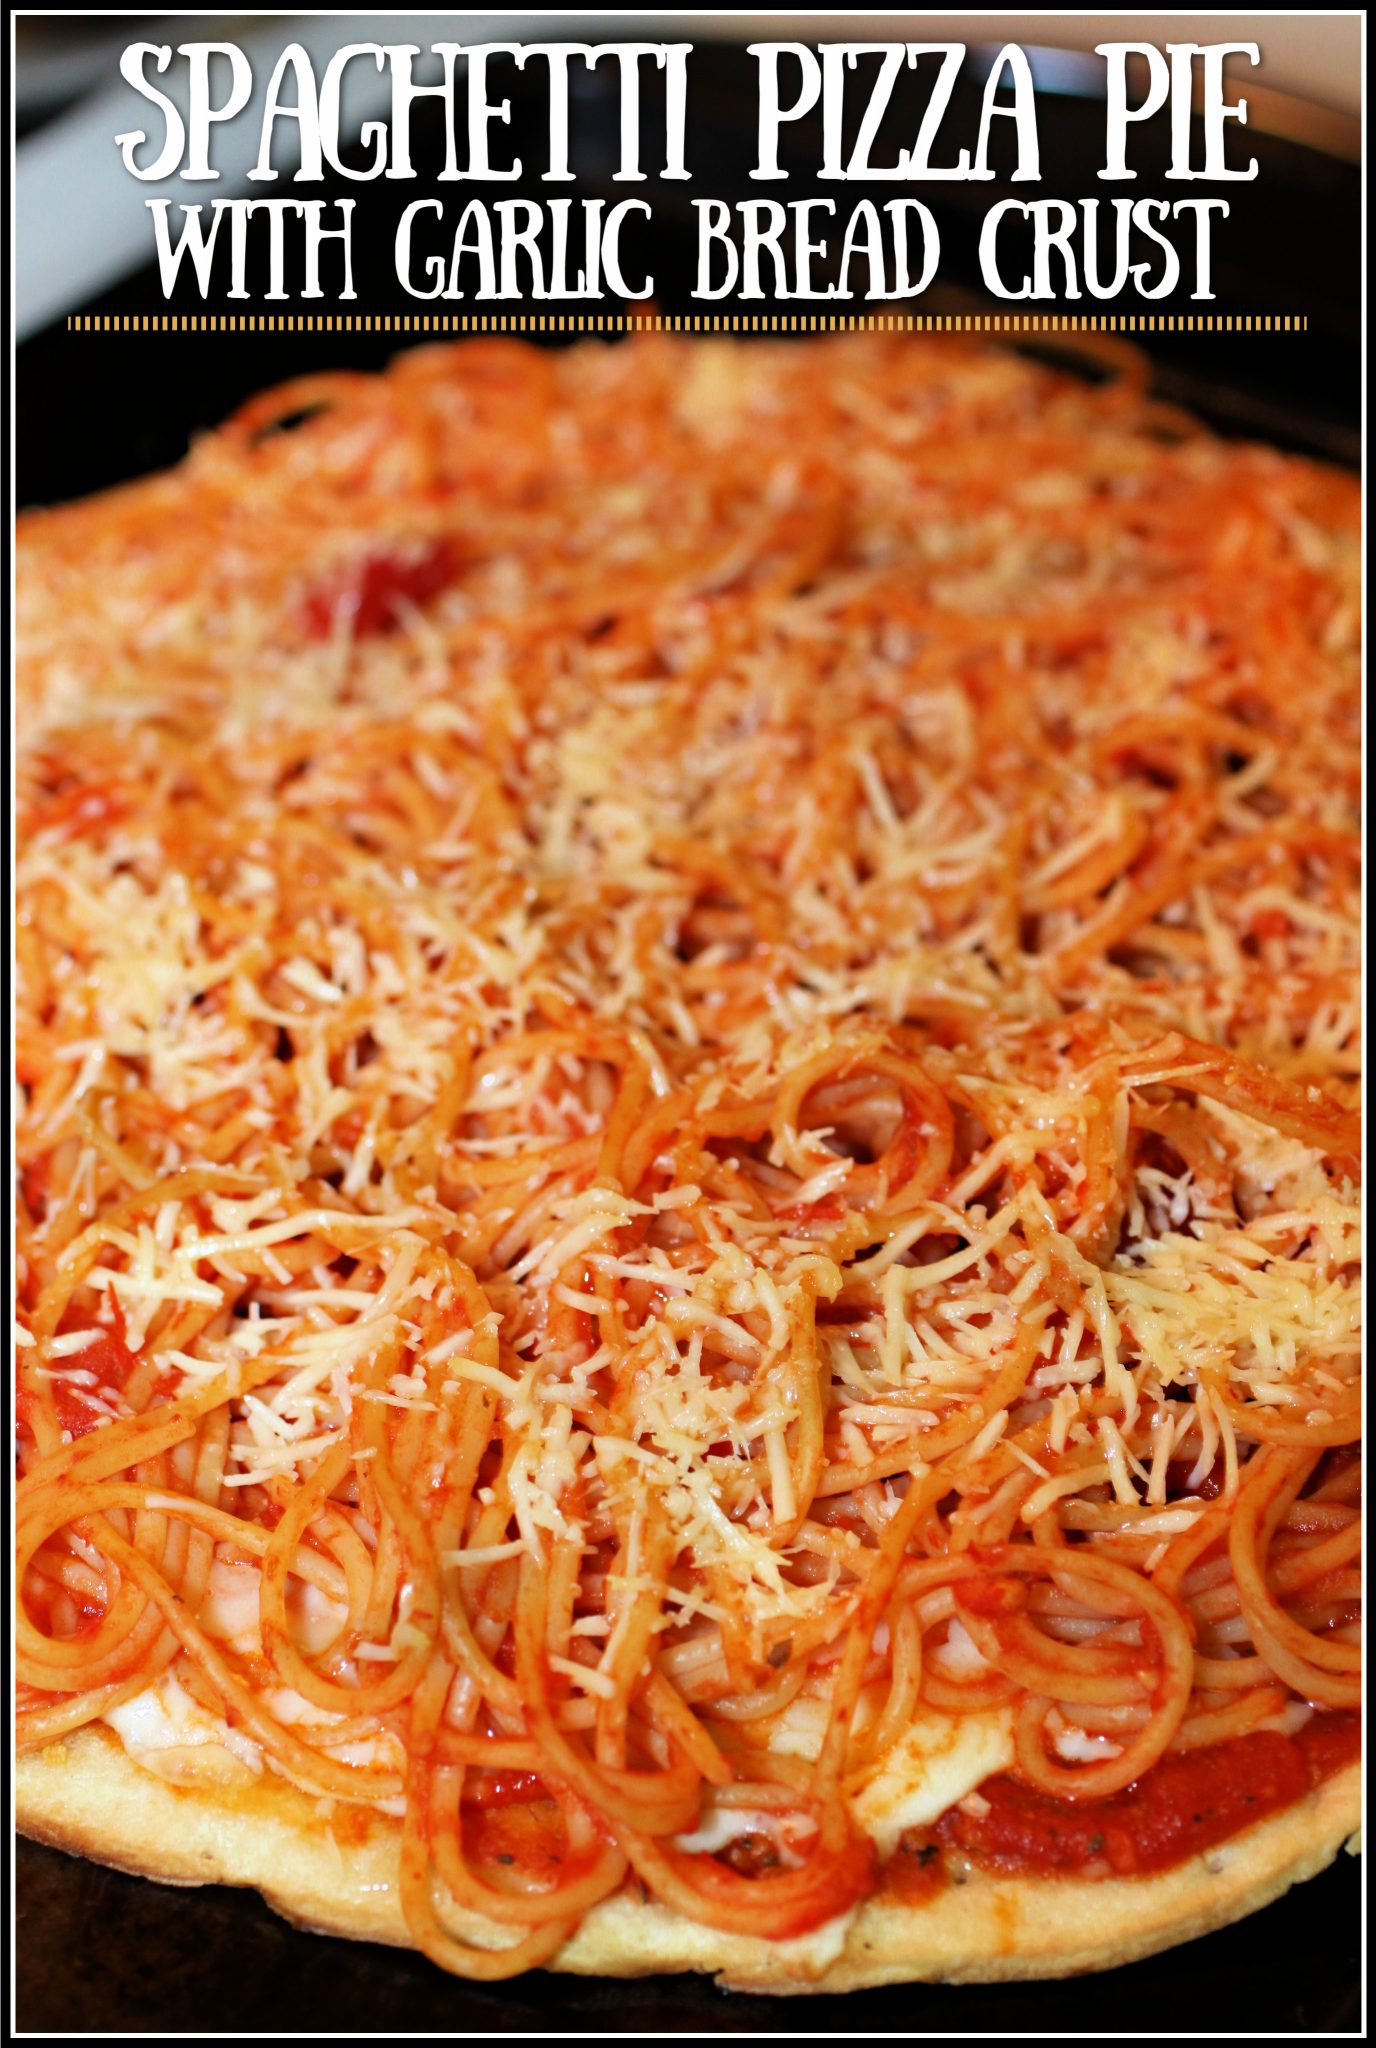 It's a Spaghetti Pizza Pie with Garlic Bread Crust - For the Love of Food